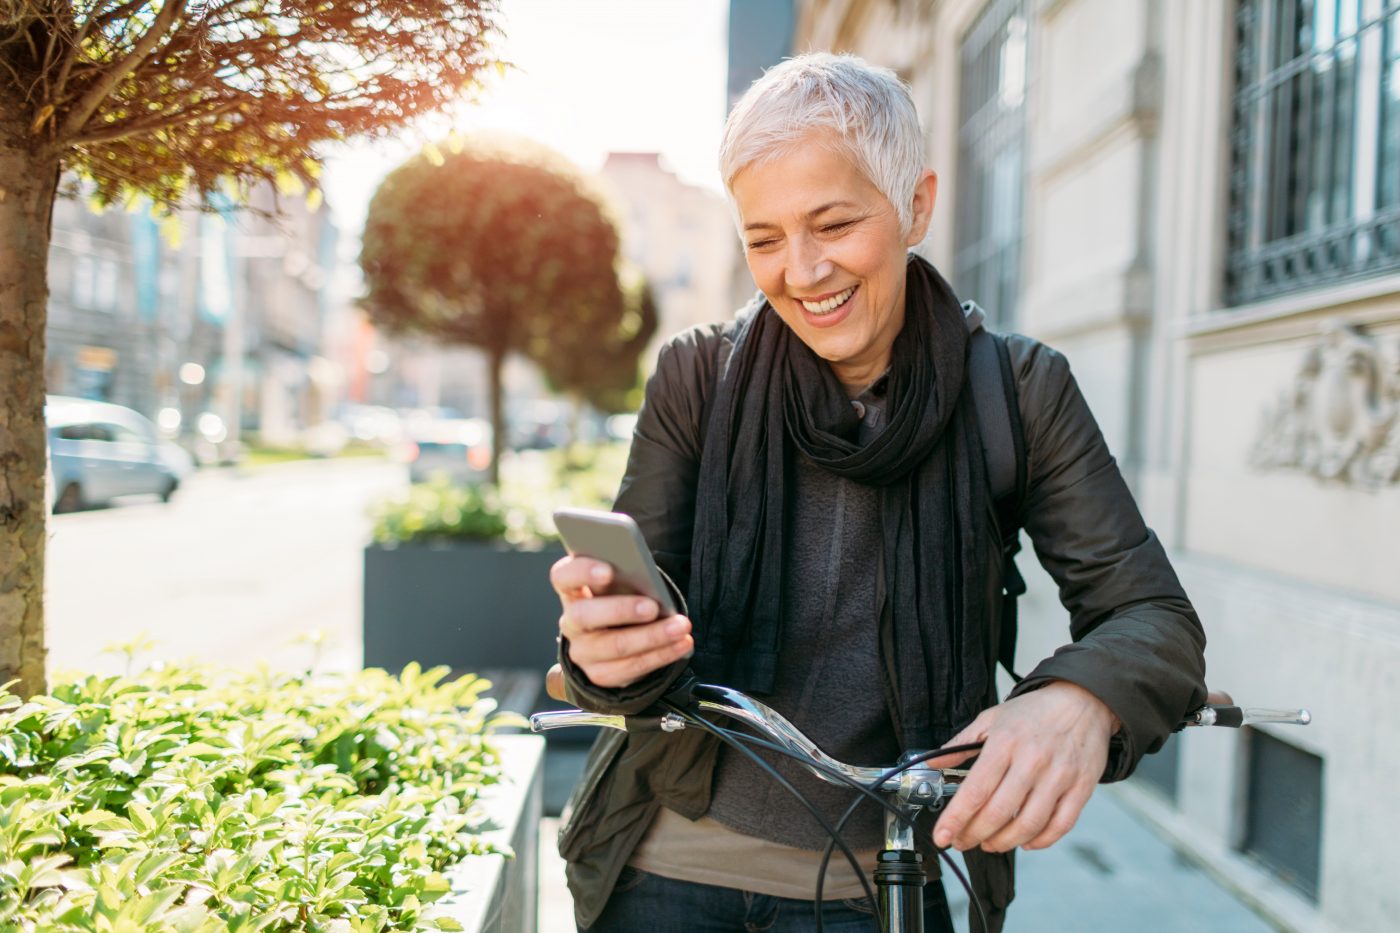 Mature women using her phone on a bicycle